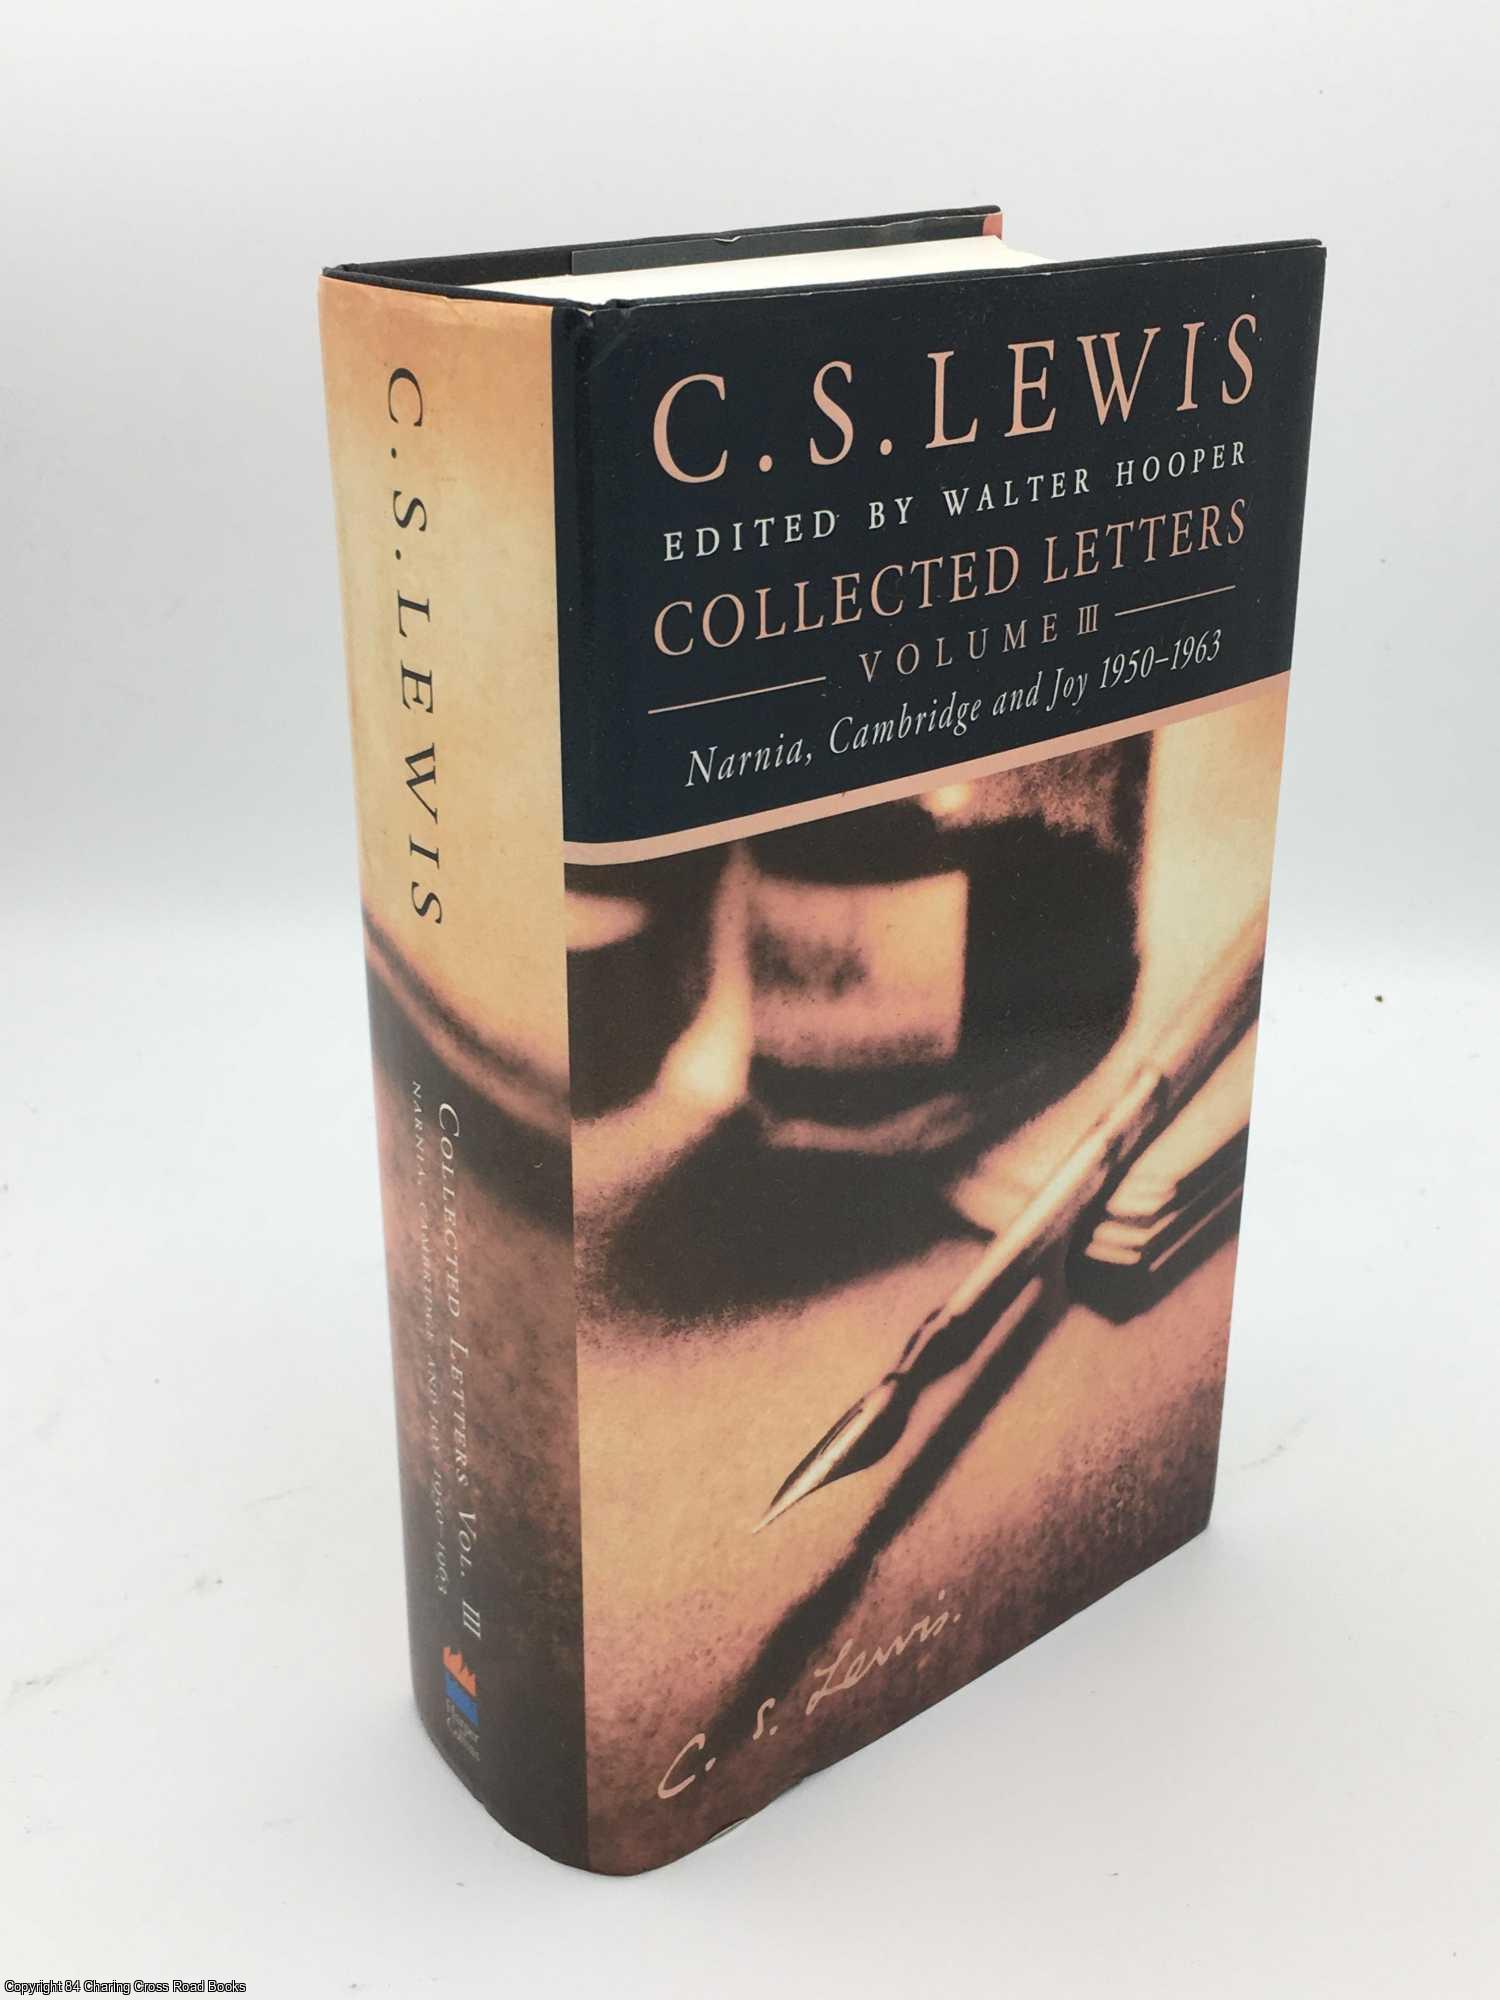 Lewis, C. S. - Collected Letters, Vol. 3: Narnia, Cambridge and Joy, 1950-1963